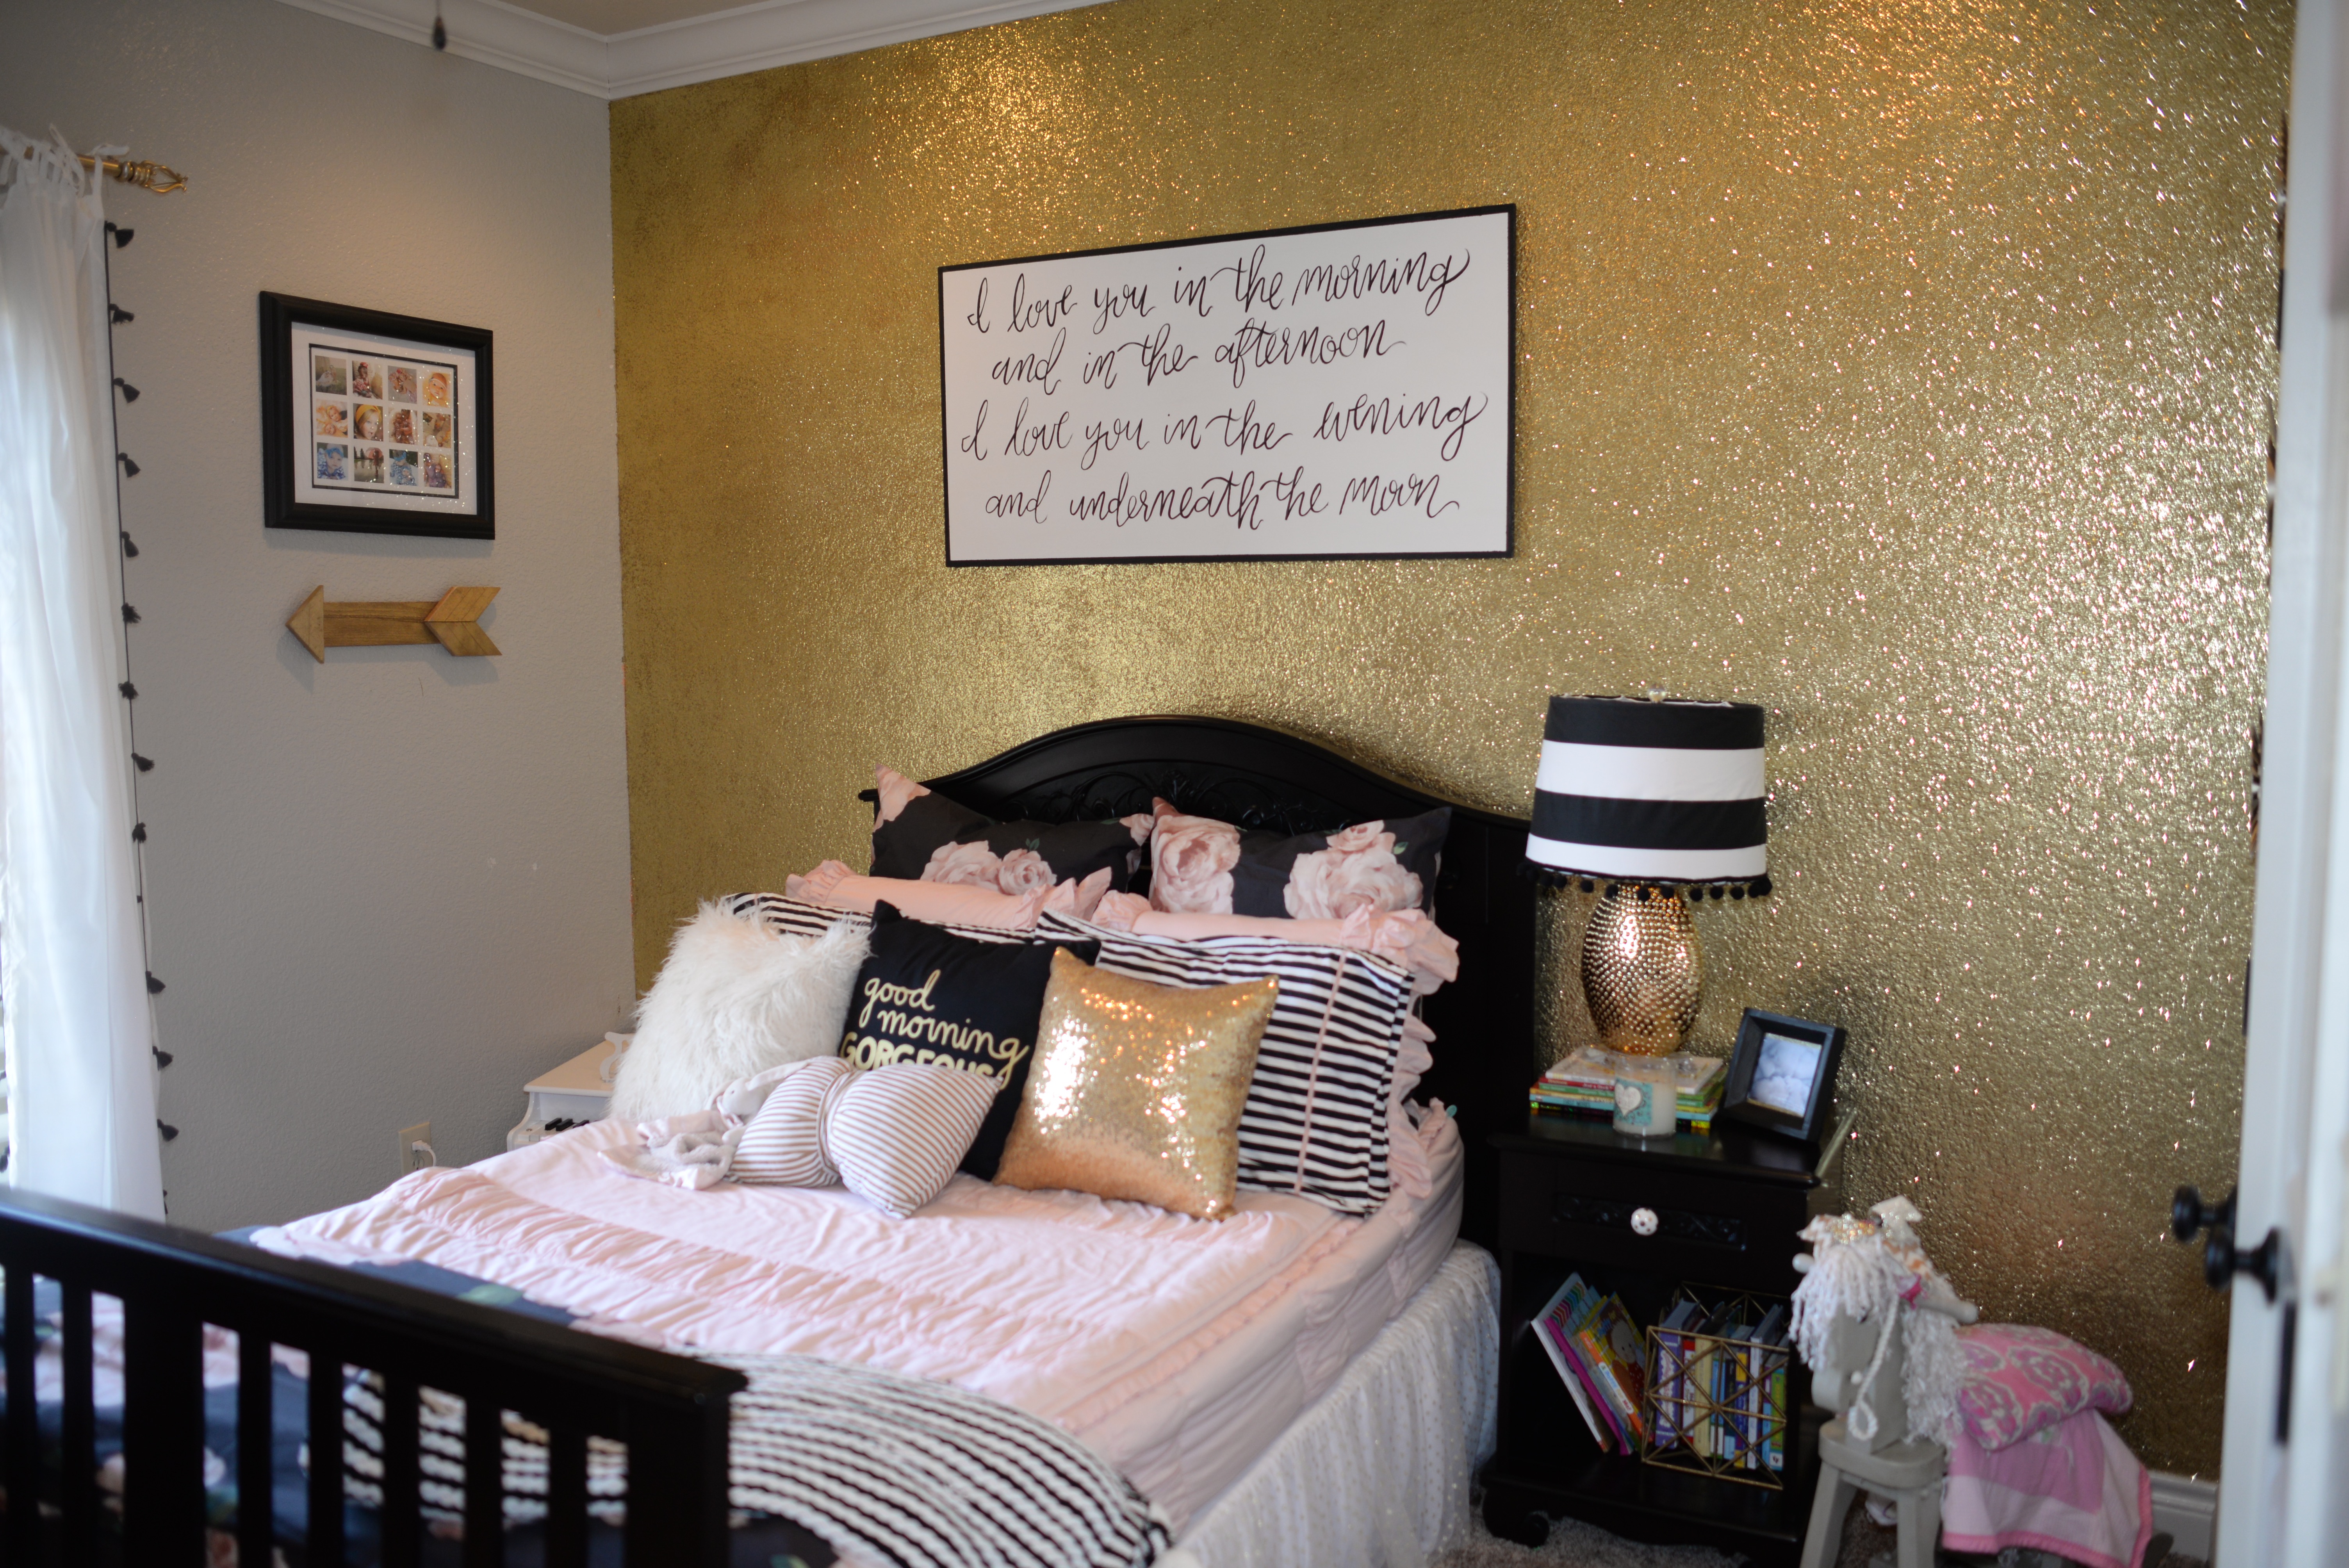 How to Paint a Wall With Gold Glitter - Ashlee Nichols